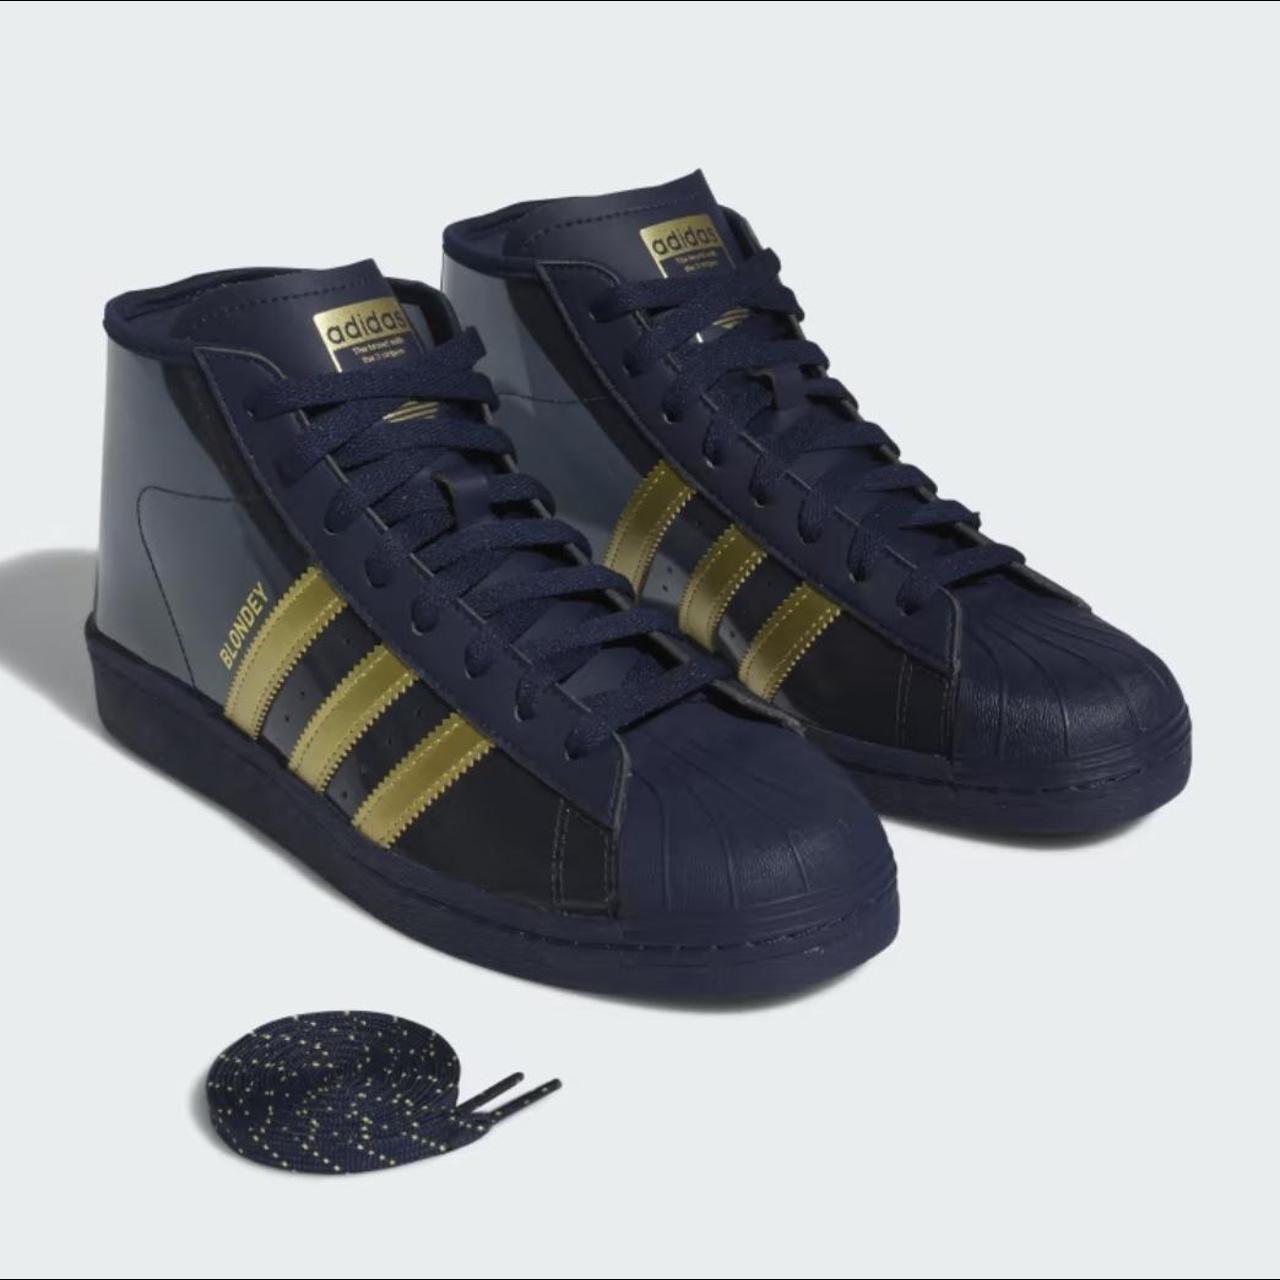 BLONDEY PRO MODEL ADV SHOES navy & gold see-through... - Depop